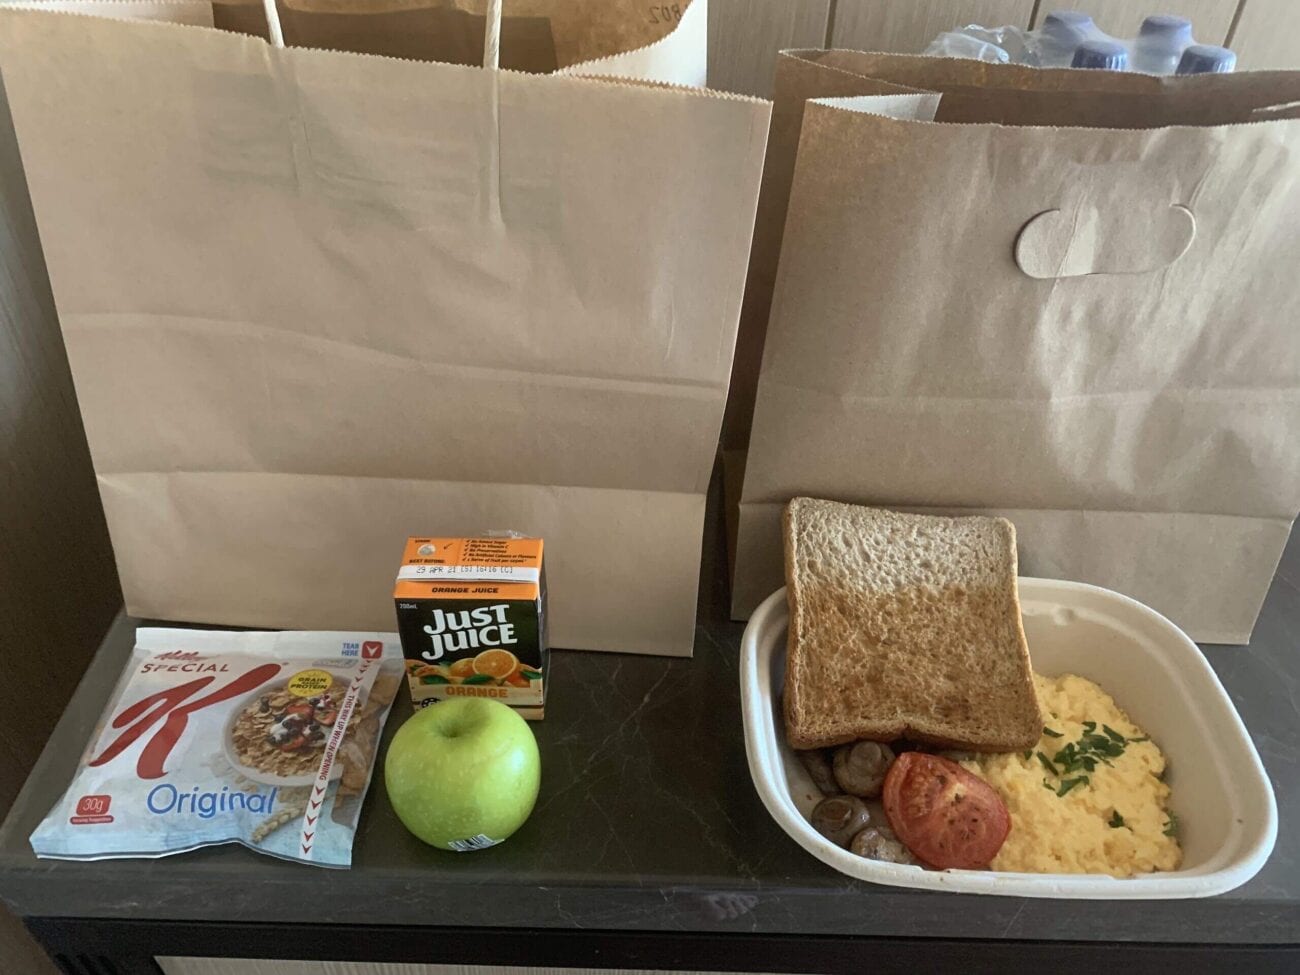 Some returning colleges are giving their students the saddest meals ever seen. This food is so bad you'd believe it came from Fyre Fest.